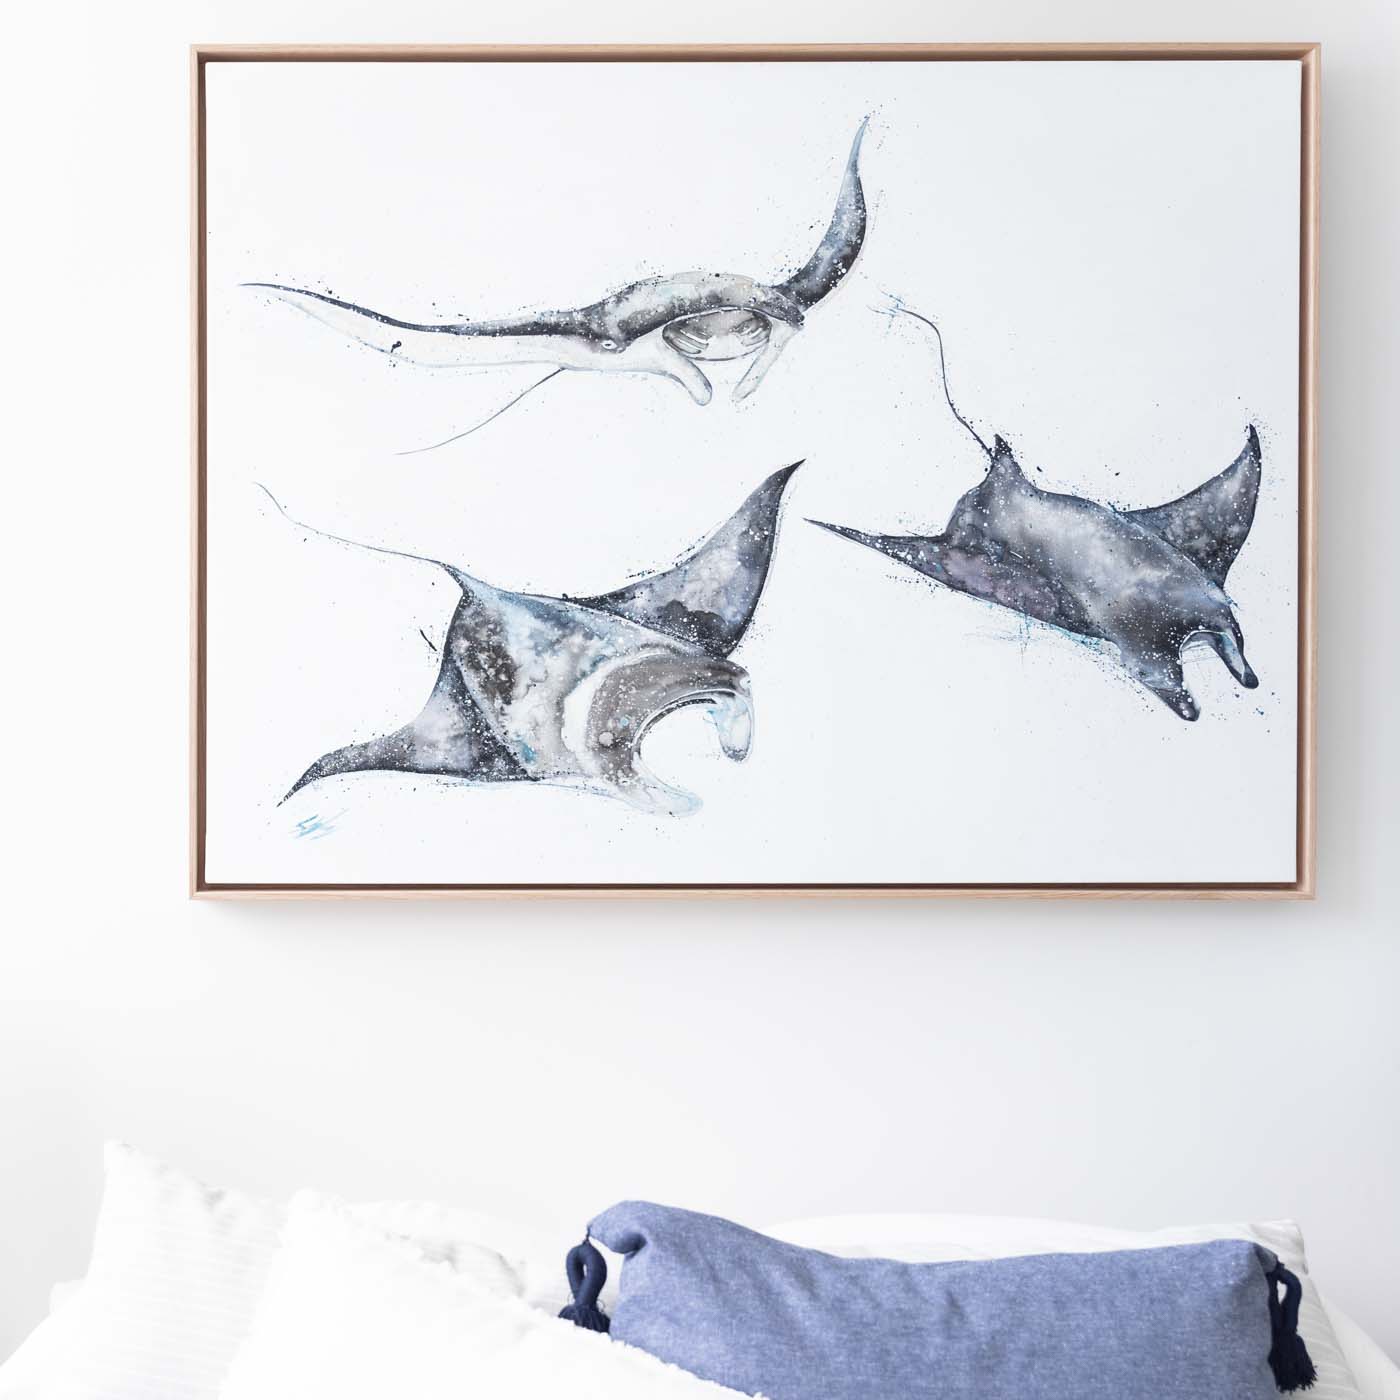 three manta rays painted on canvas framed in oak